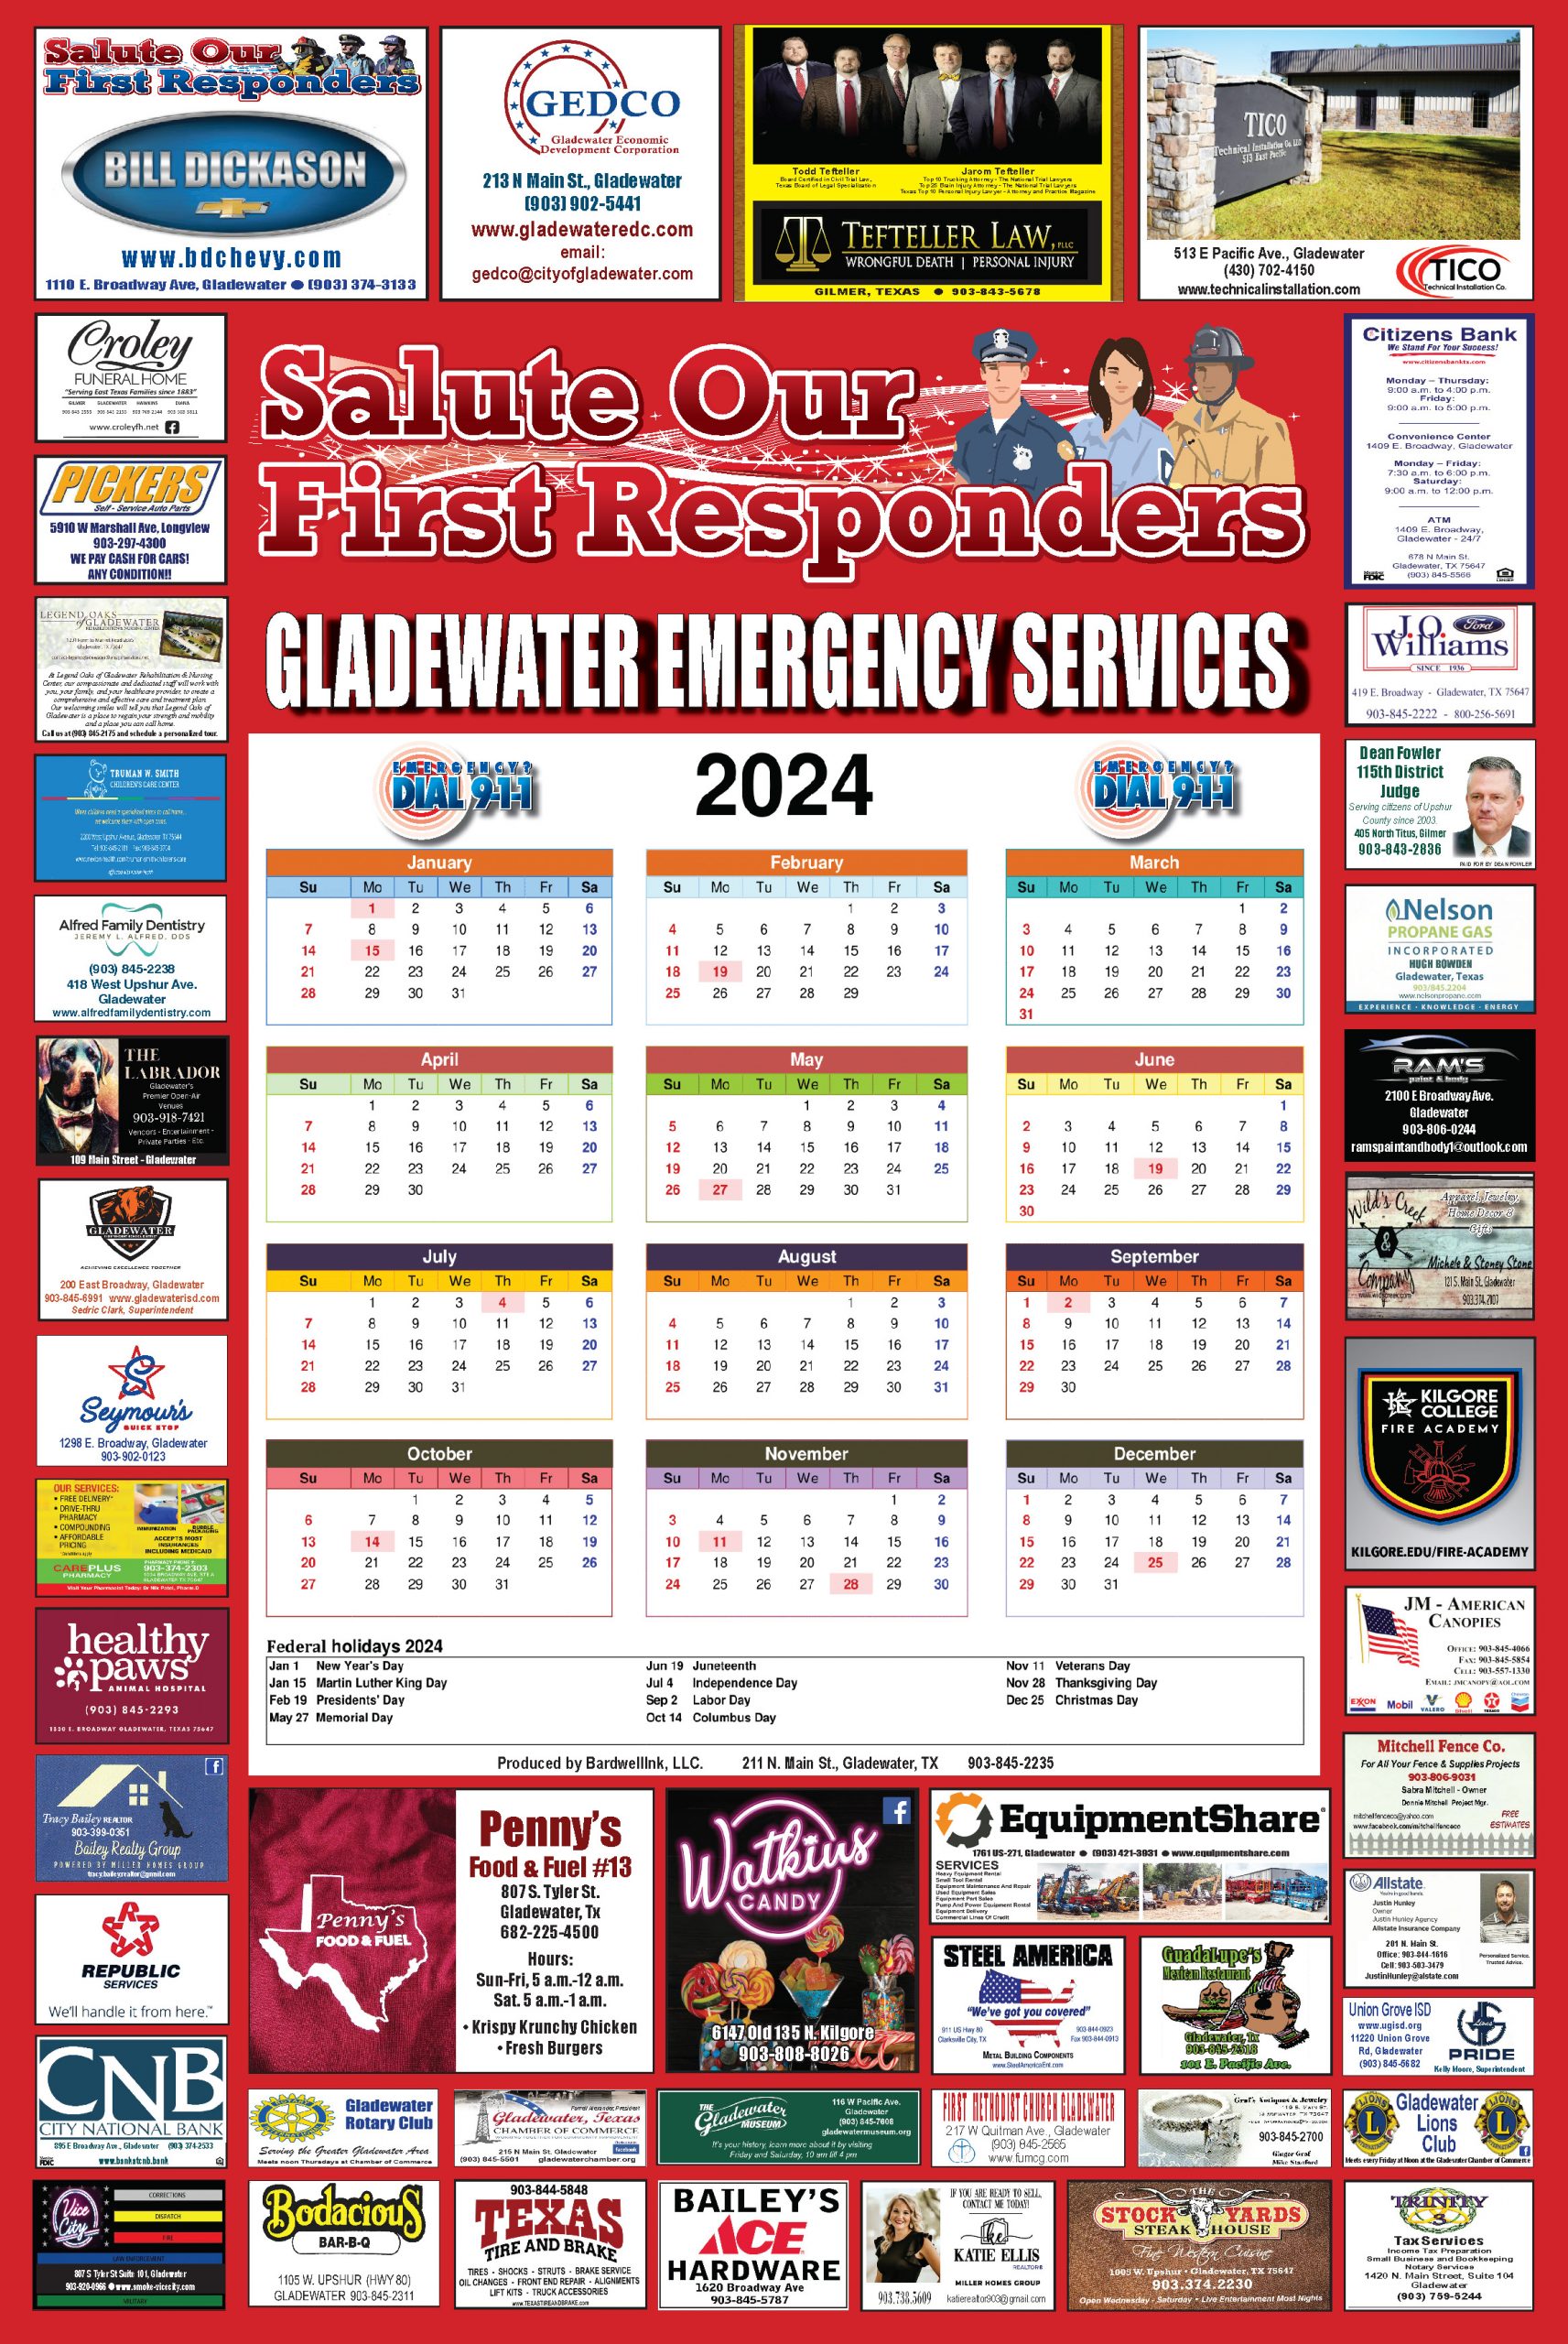 Download a PDF copy of this year's Emergency Services Calendar